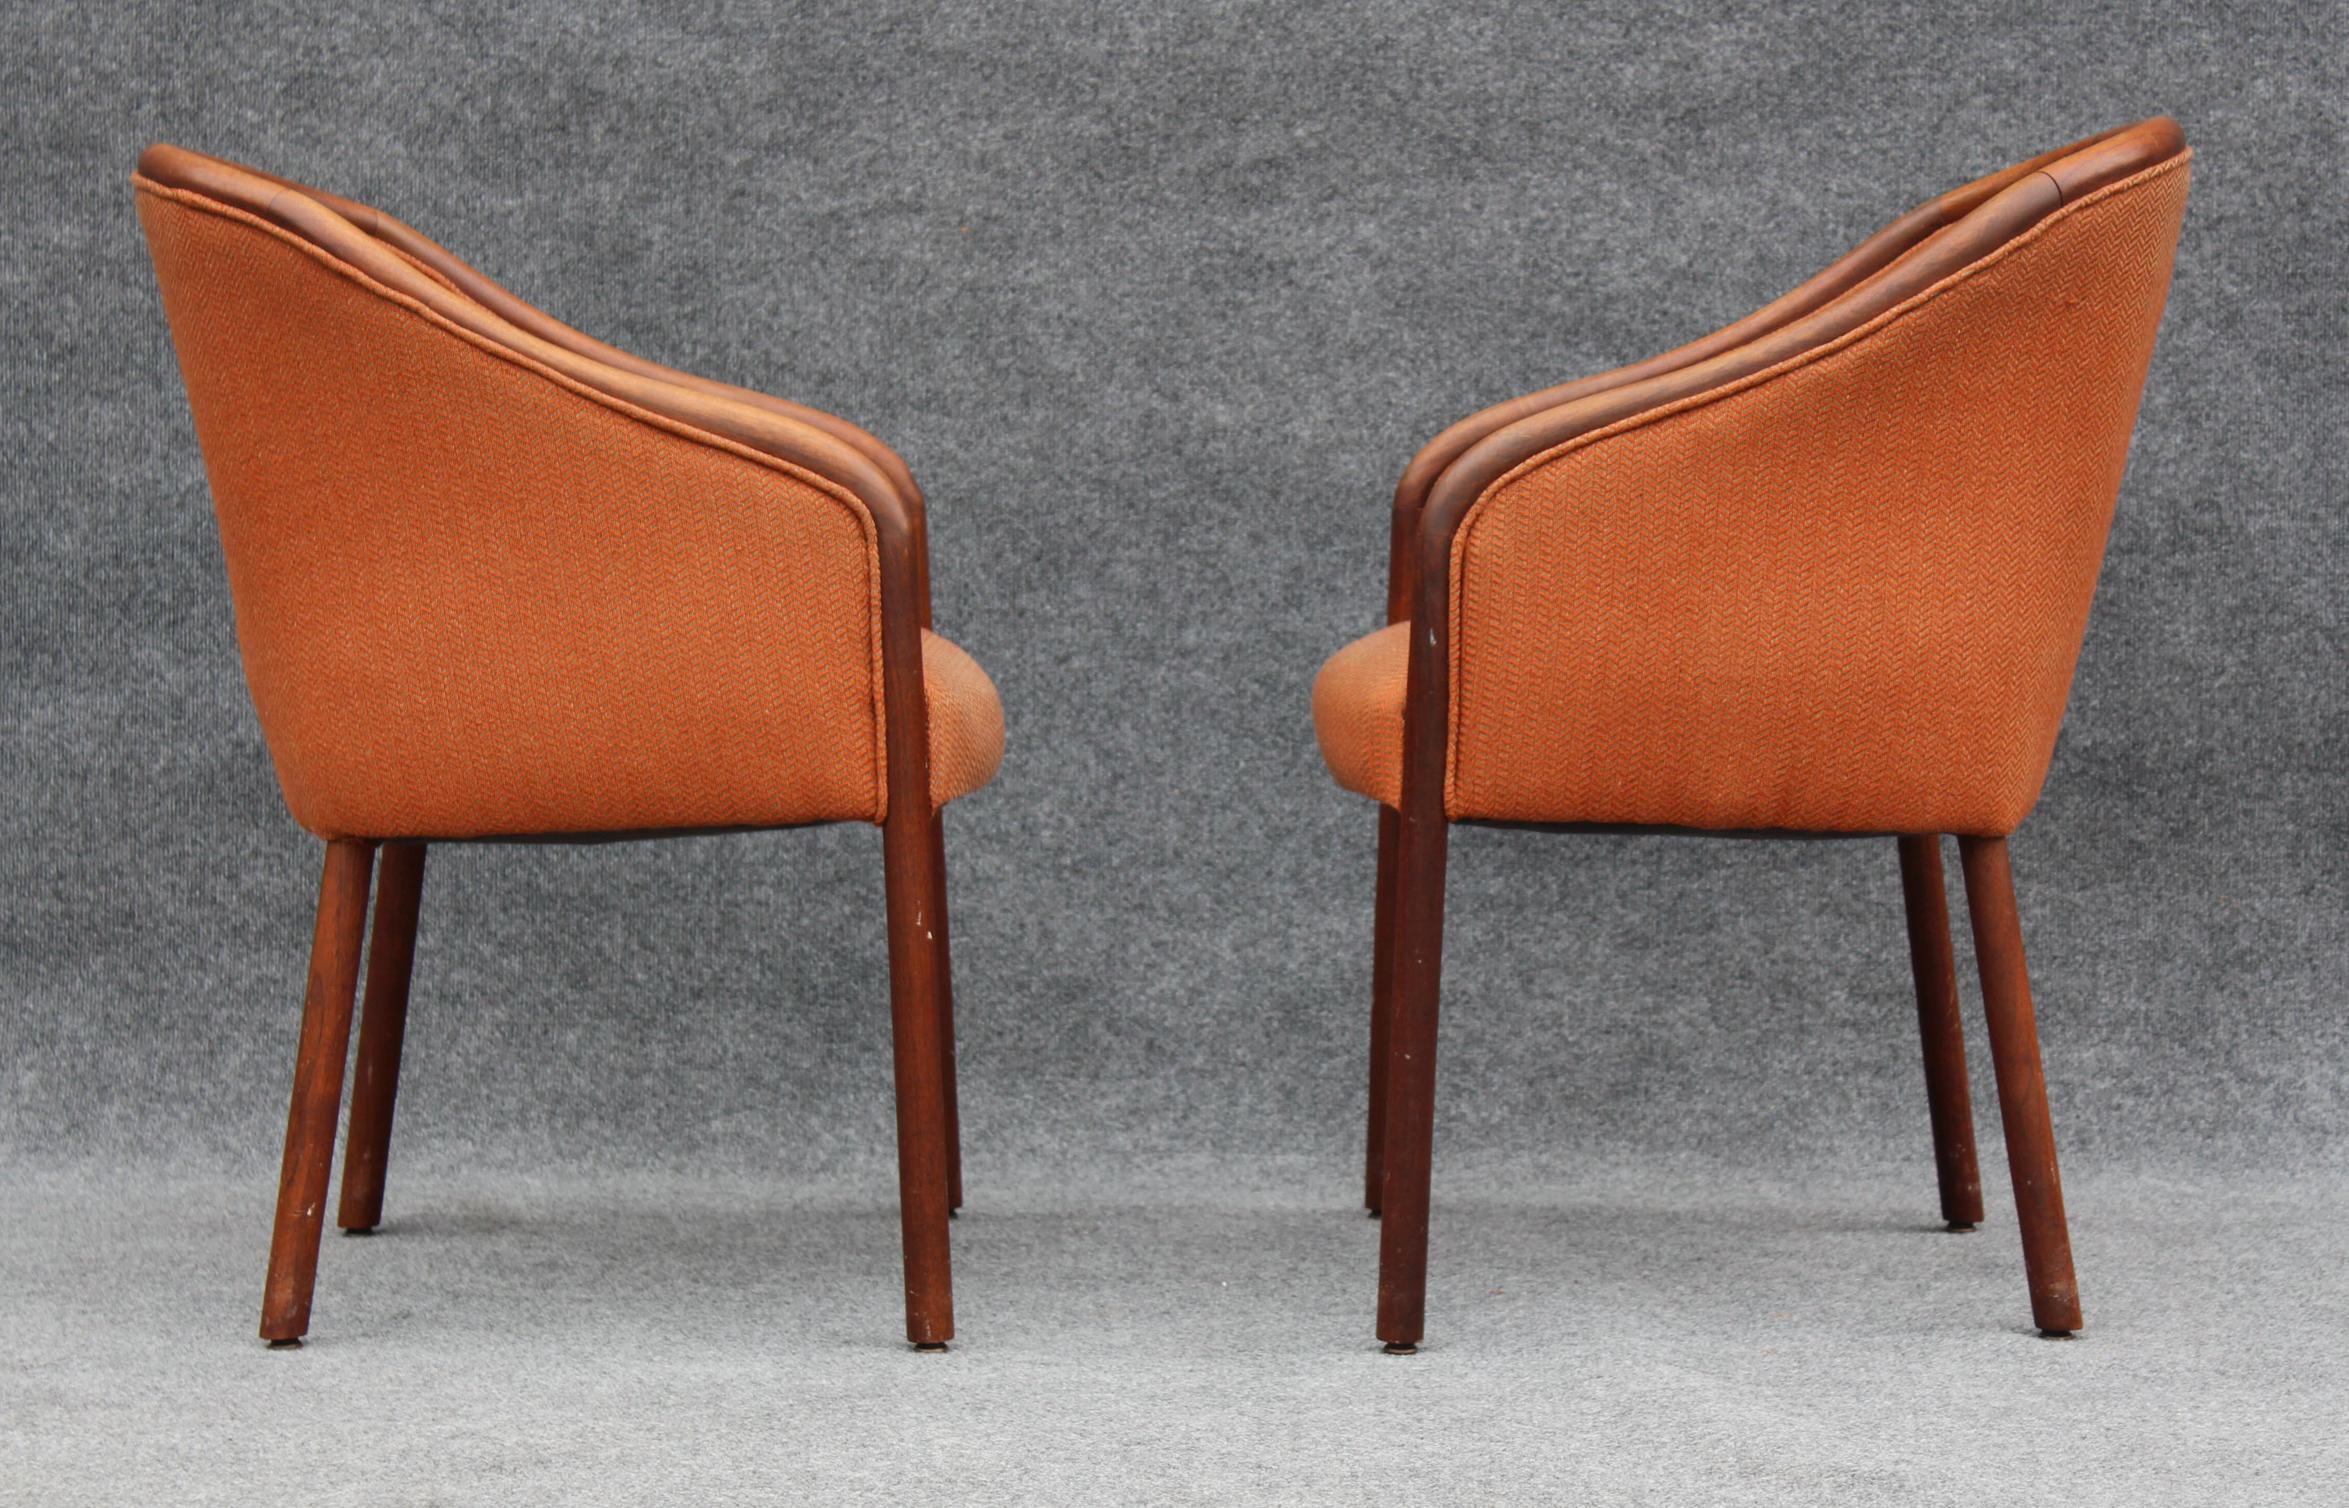 Upholstery Pair of Mid-Century Modern Walnut Armchair Side Chairs After Ward Bennett